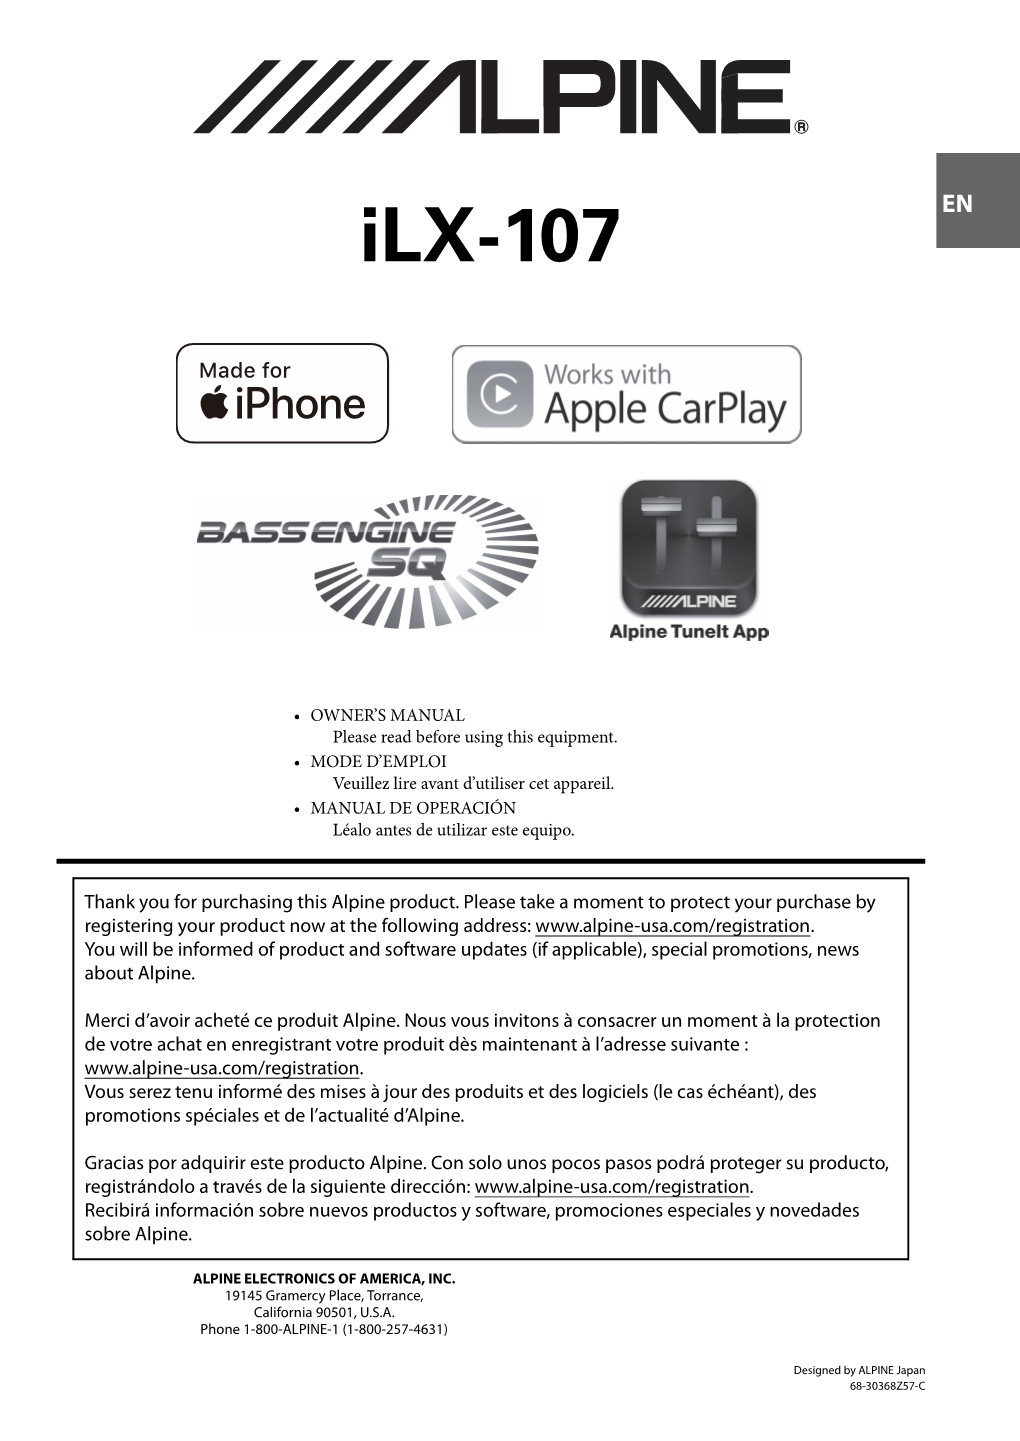 Alpine Ilx-107” from the Bluetooth Pairing List of Your Iphone for Pairing